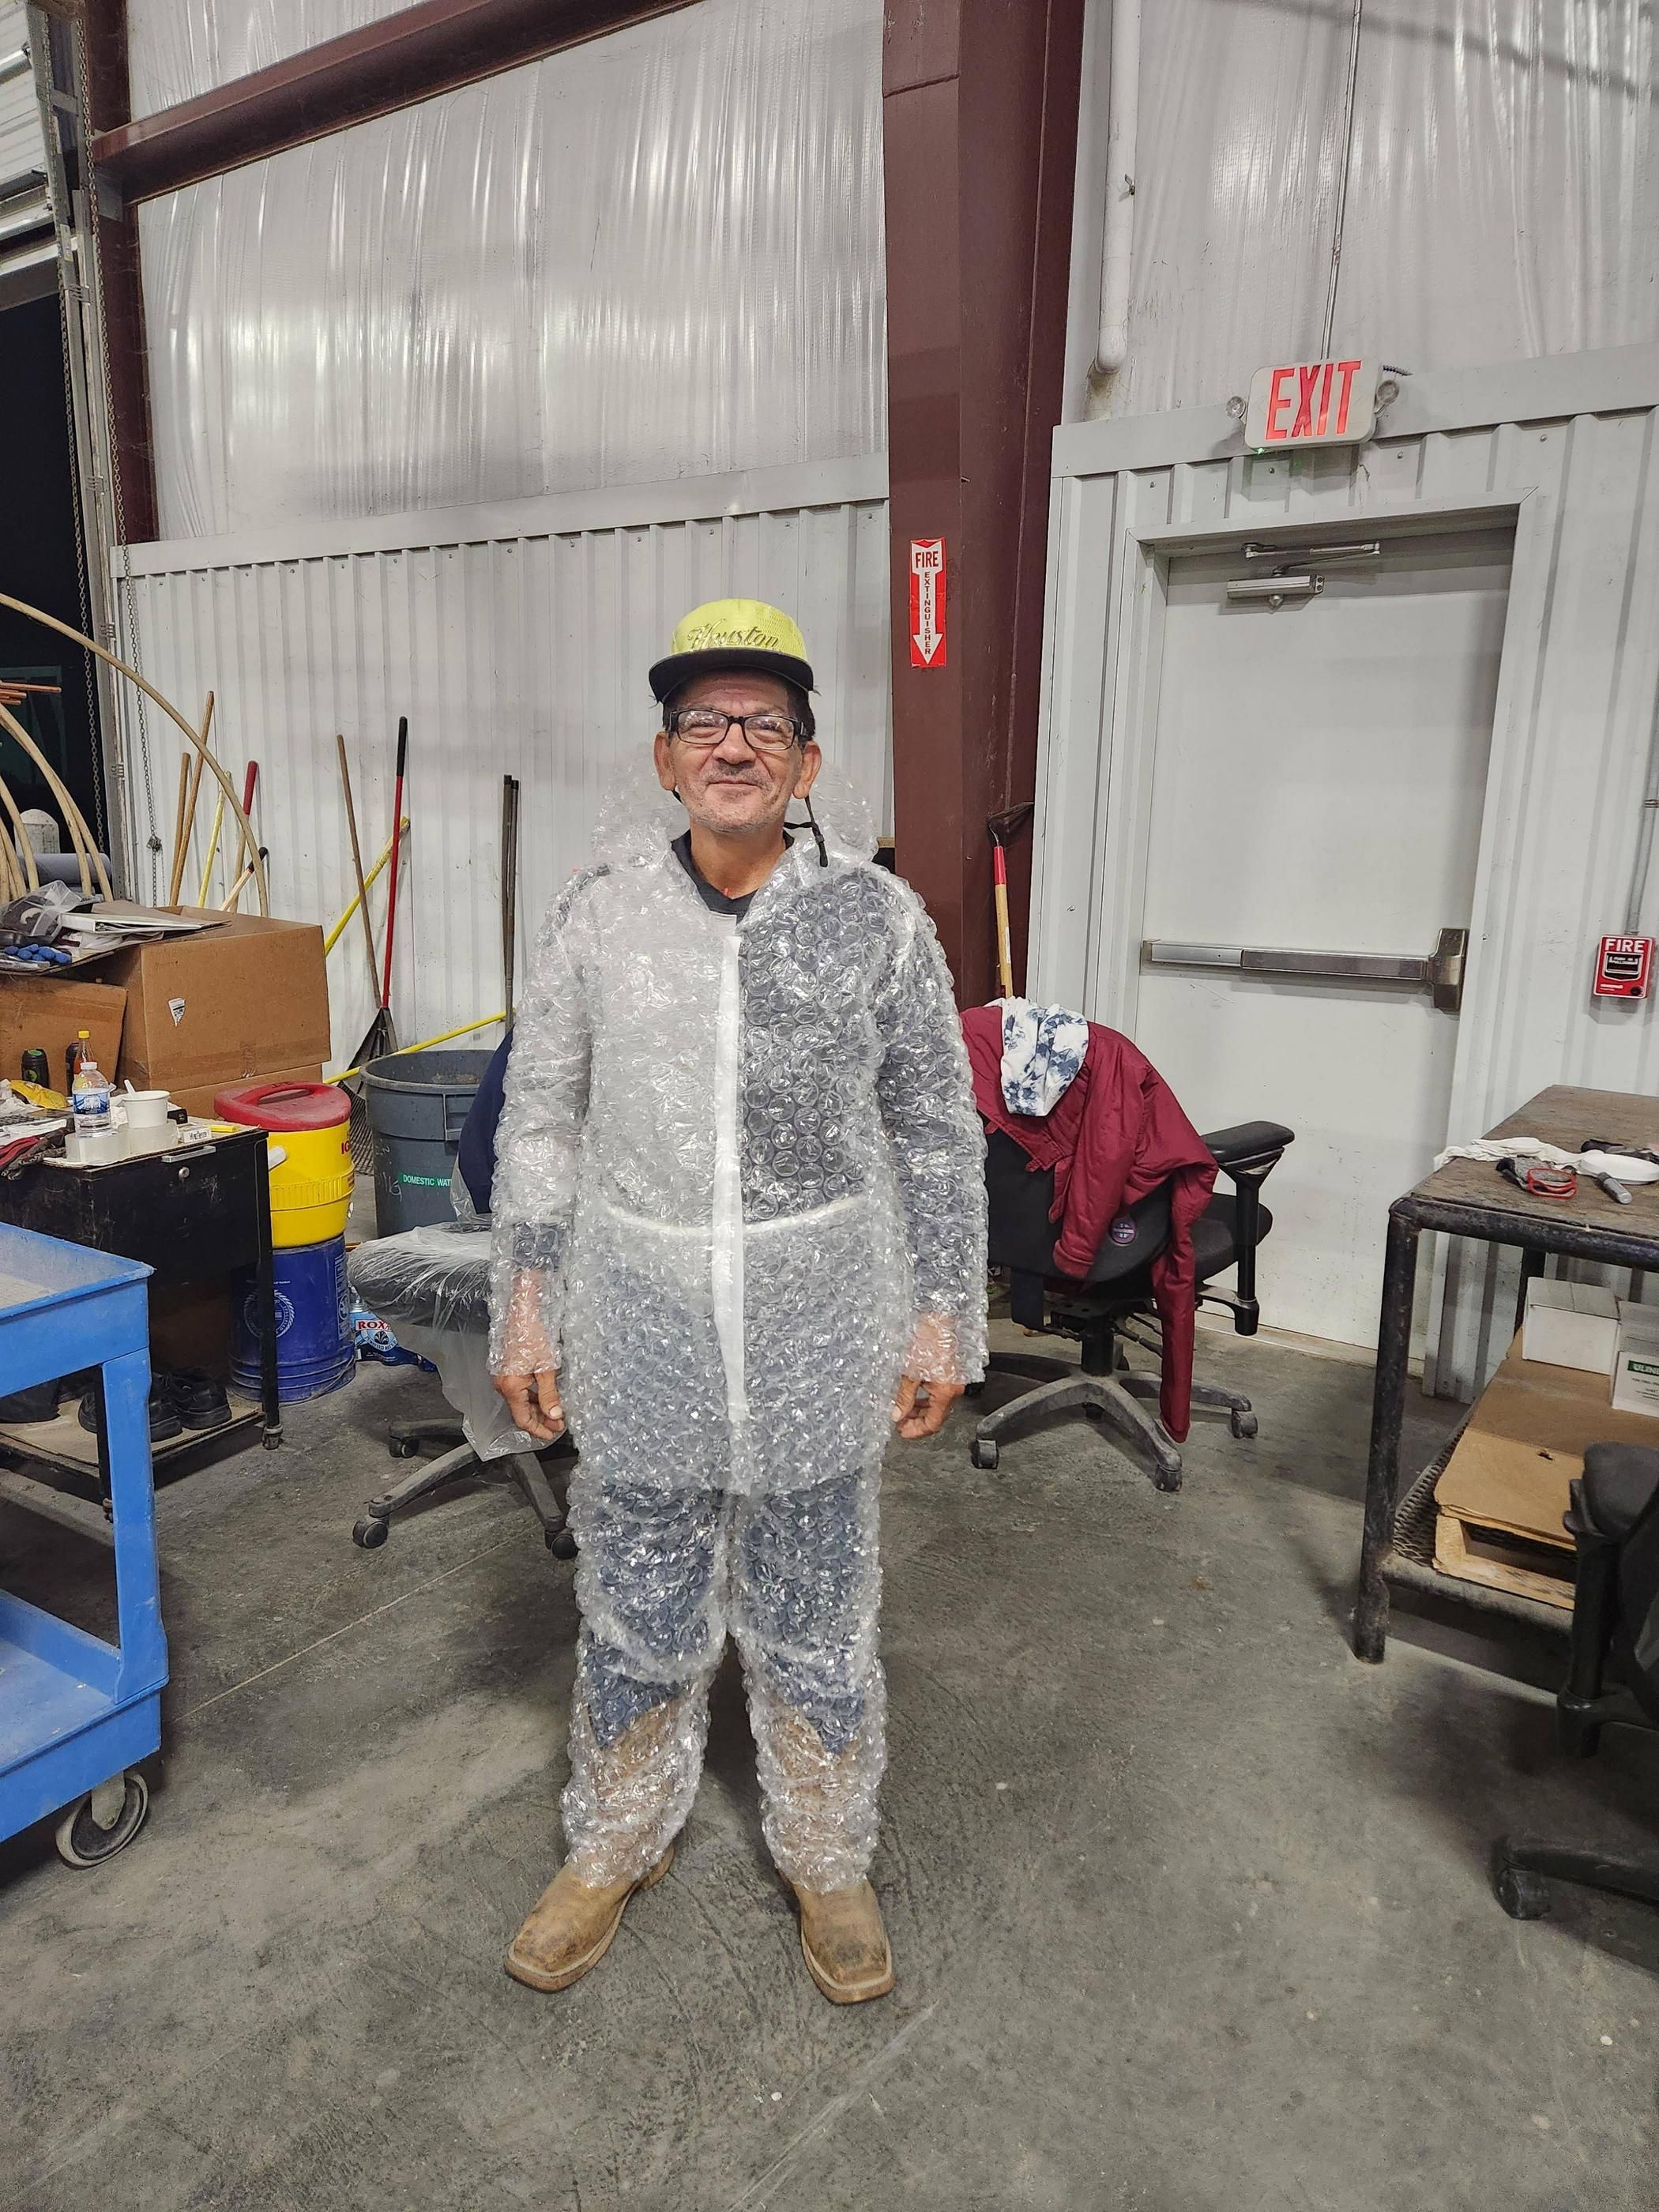 After getting hit by a forklift twice in one week, my coworker started wearing protection.